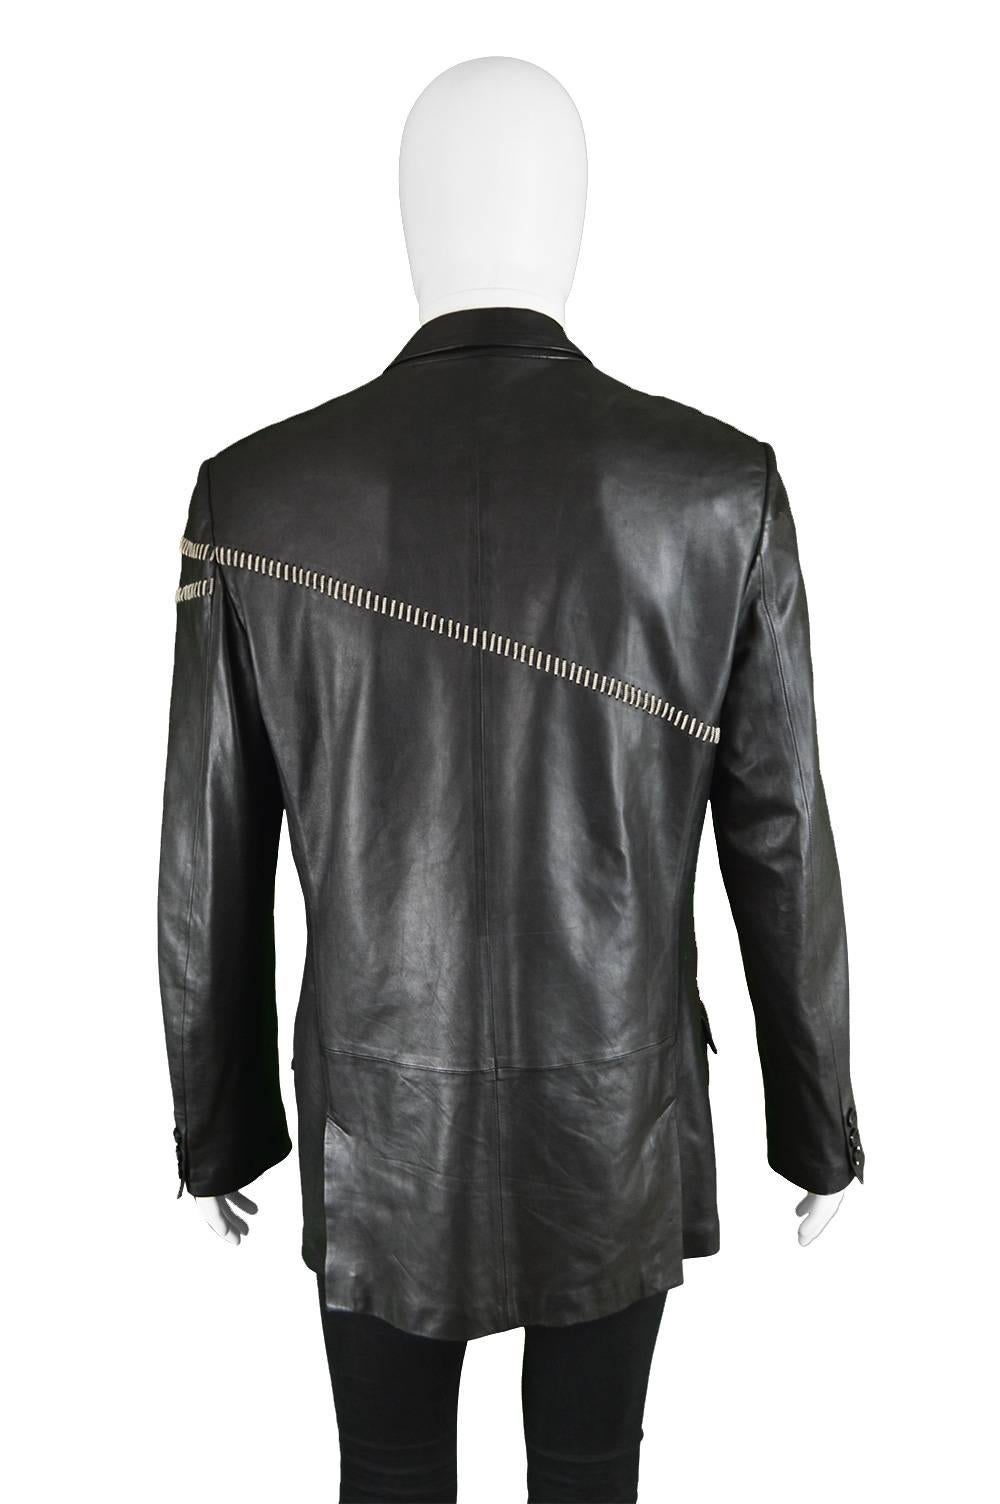 Gianni Versace Vintage Men's Leather Chain Embroidered Blazer Jacket, 1990s 1